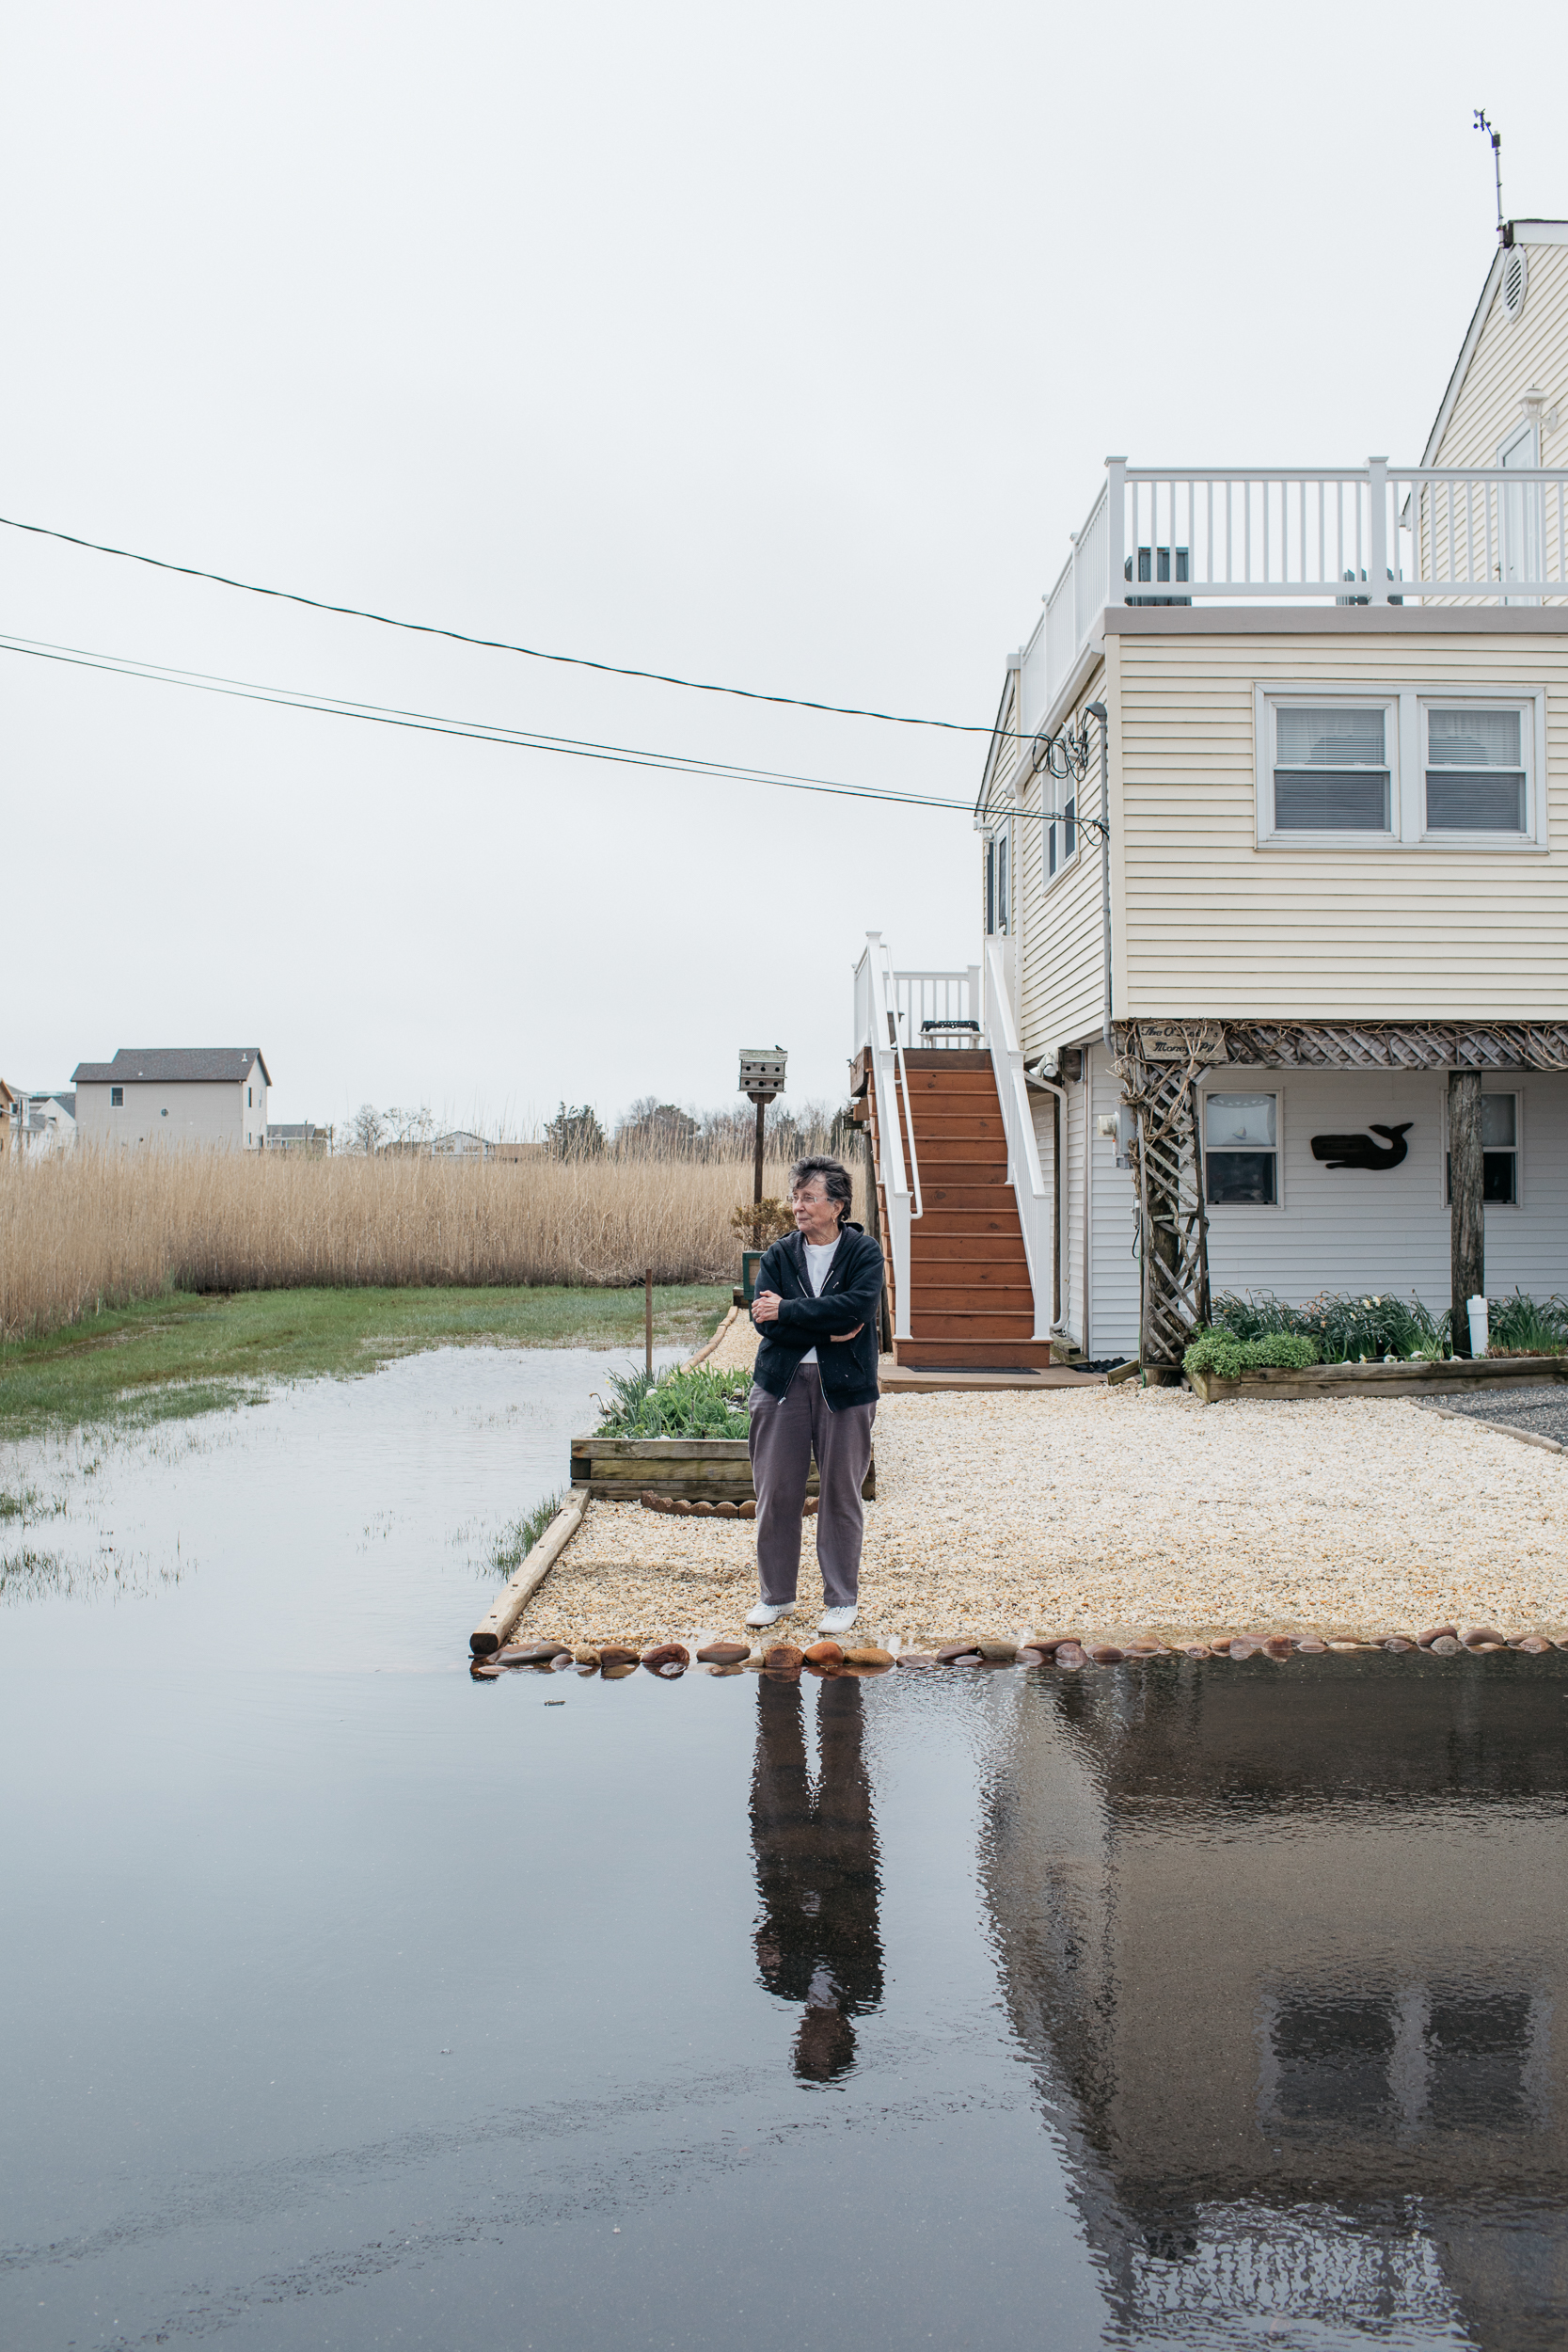 New Jersey Flooding story for Bloomberg Businessweek